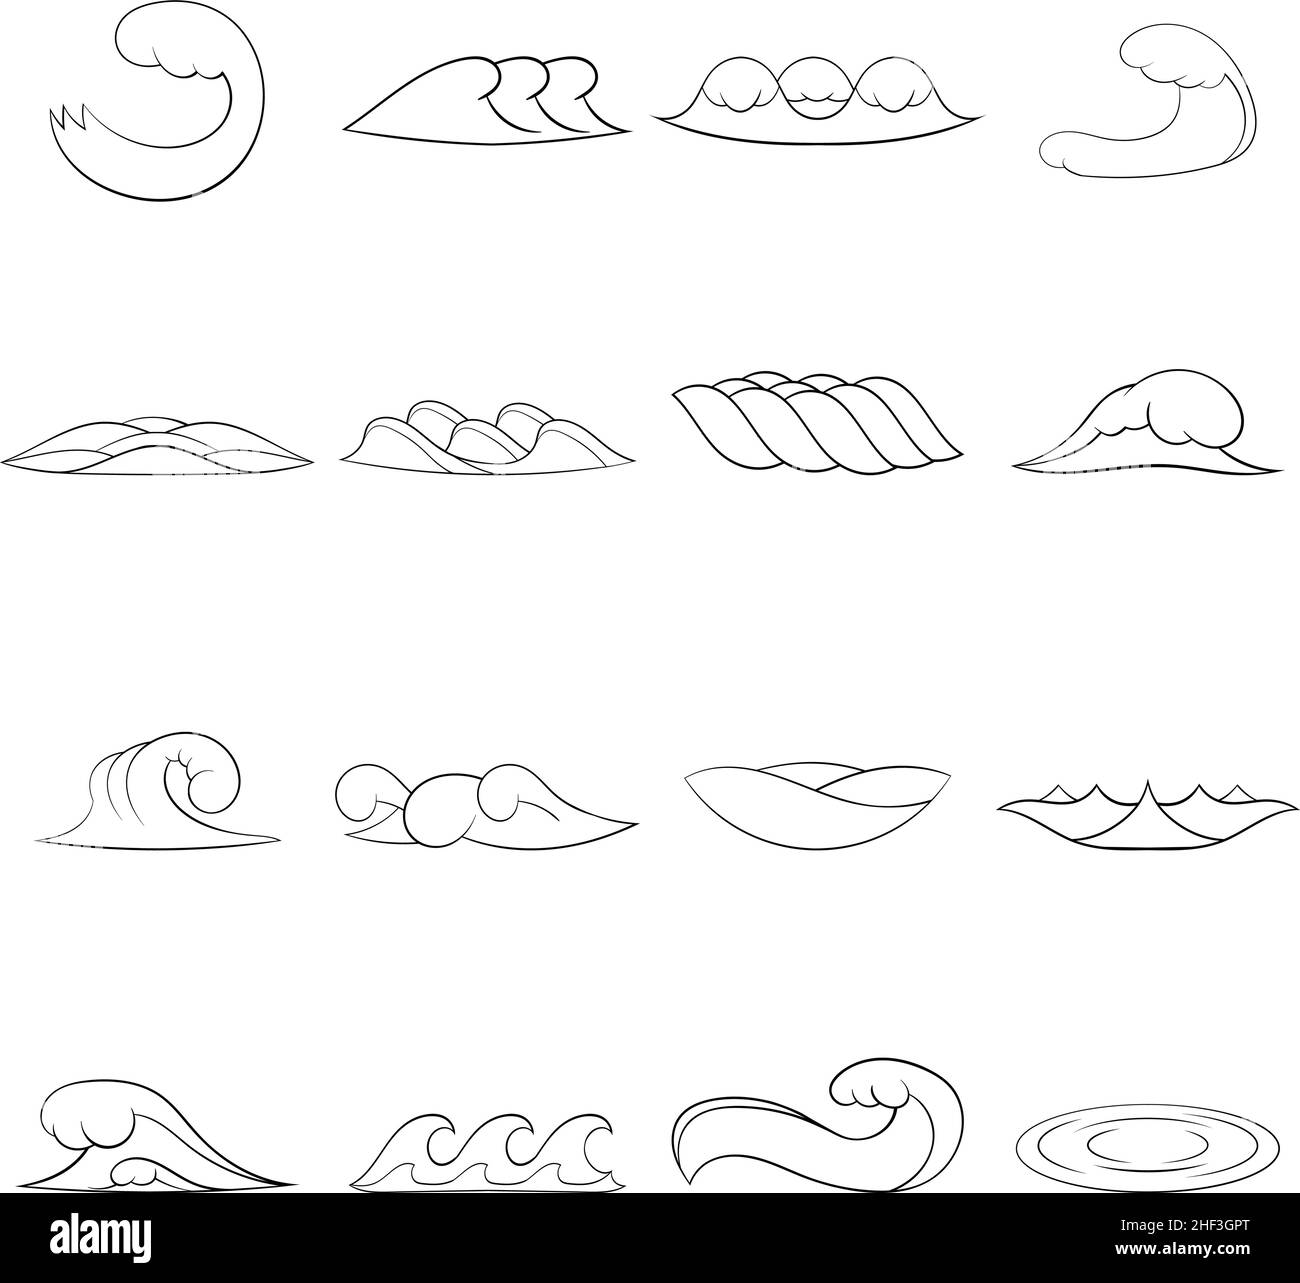 Waves set icons in outline style isolated on white background Stock Vector